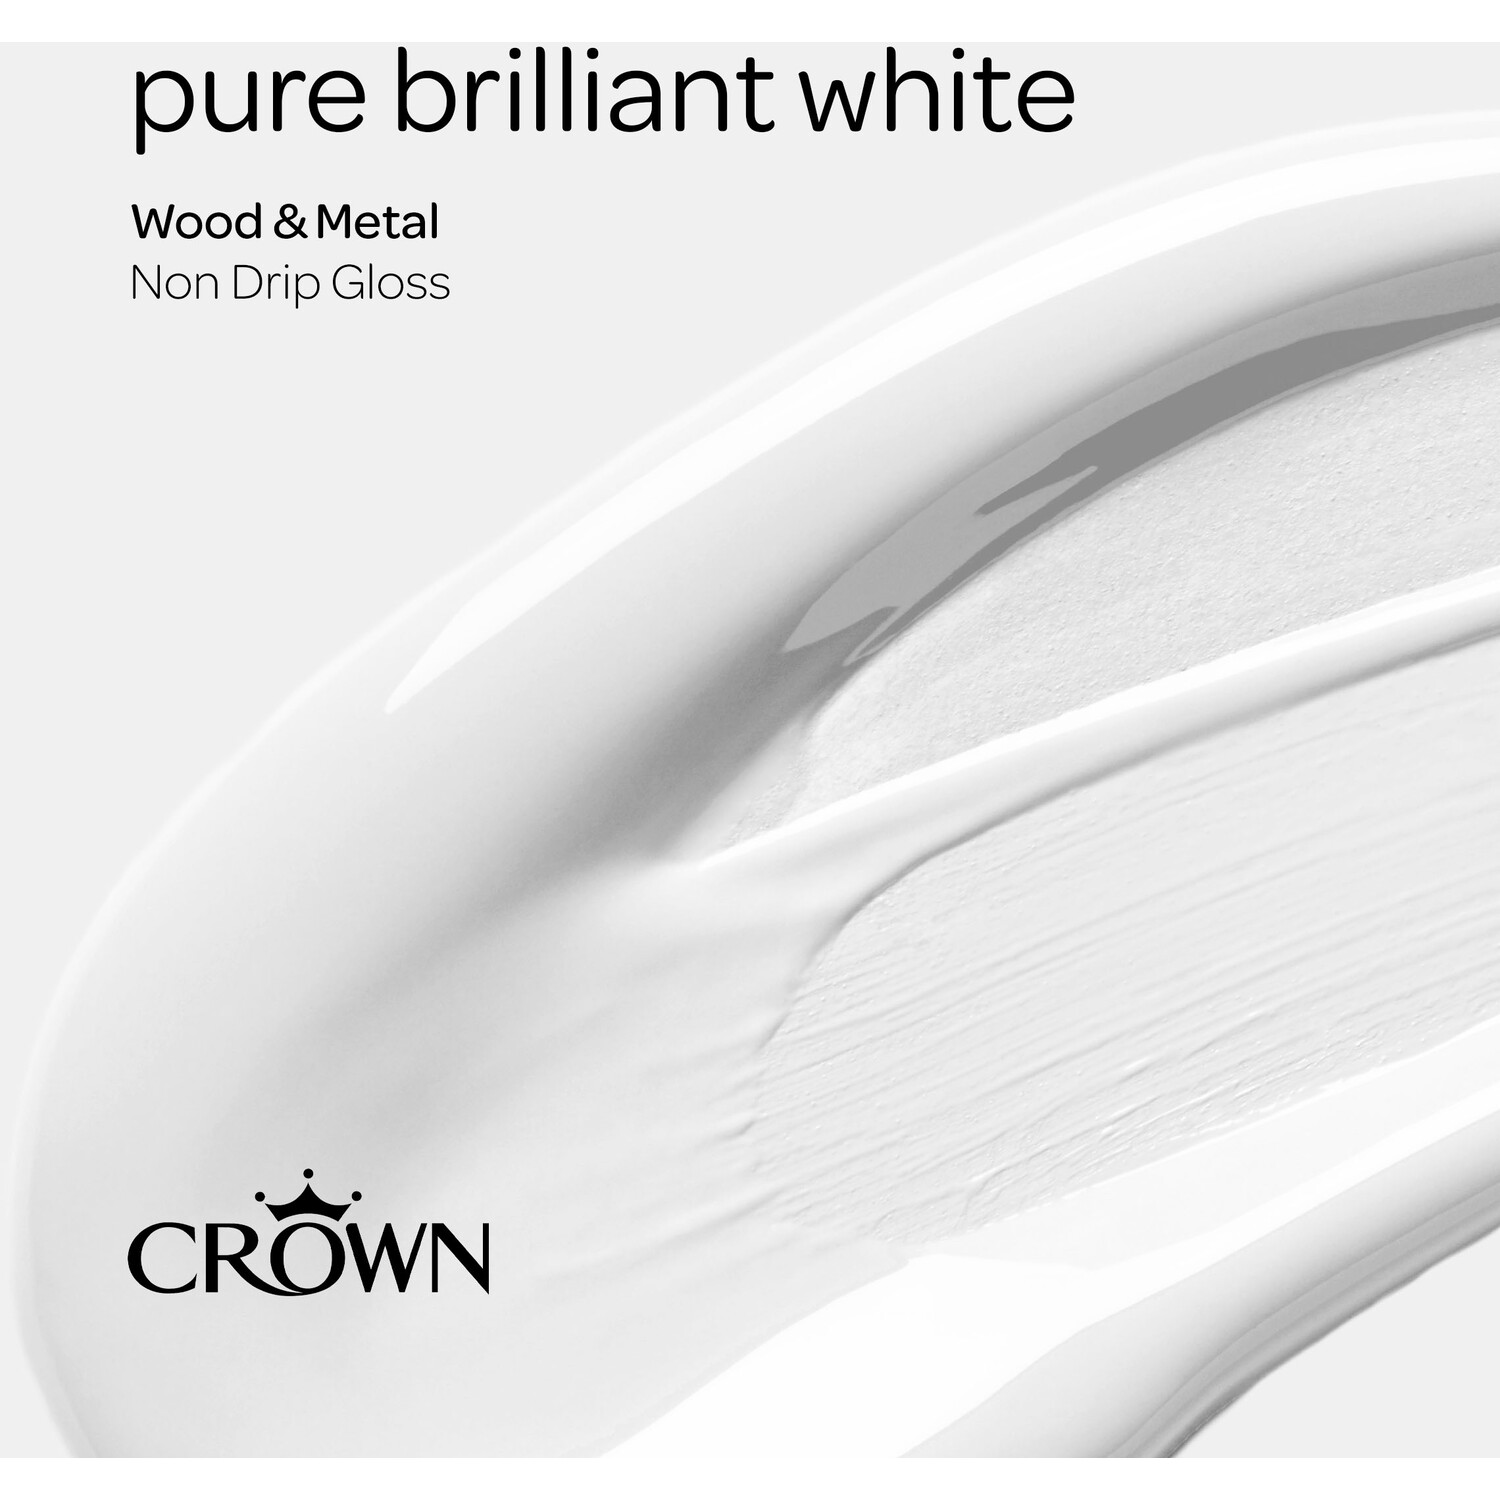 Crown Non Drip Gloss Wood and Metal Paint - Pure Brilliant White Image 5